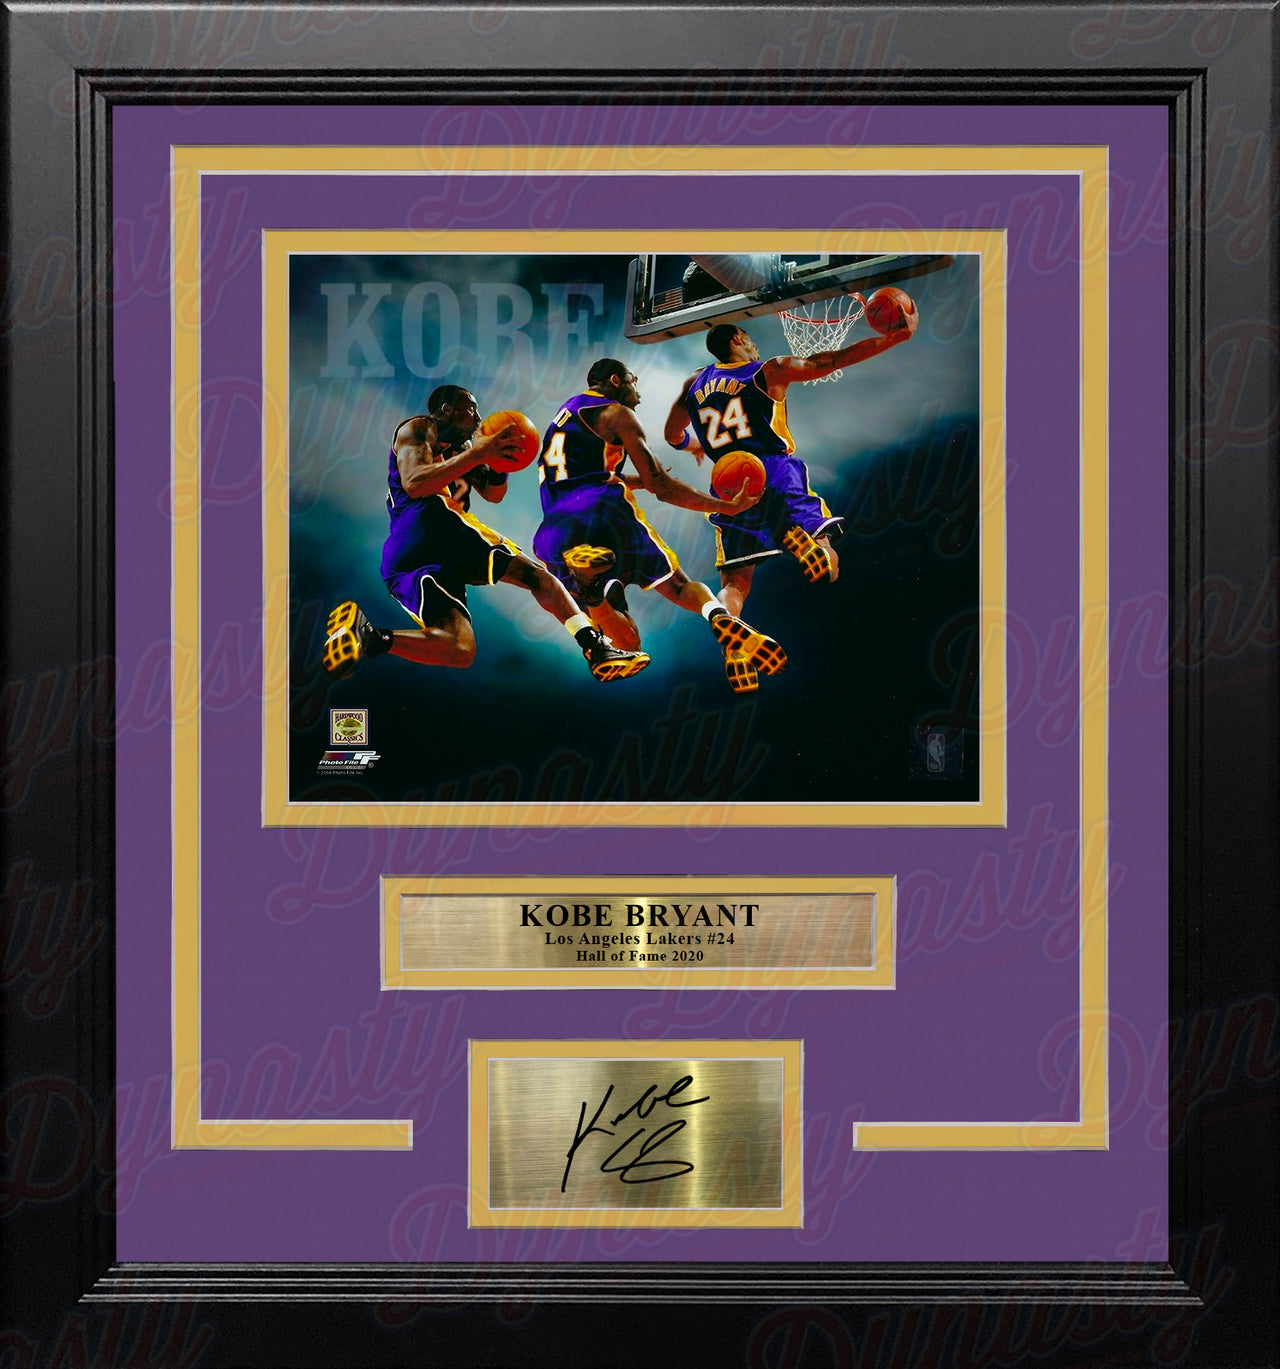 Kobe Bryant Los Angeles Lakers 8x10 Framed Collage Photo with Engraved Autograph - Dynasty Sports & Framing 